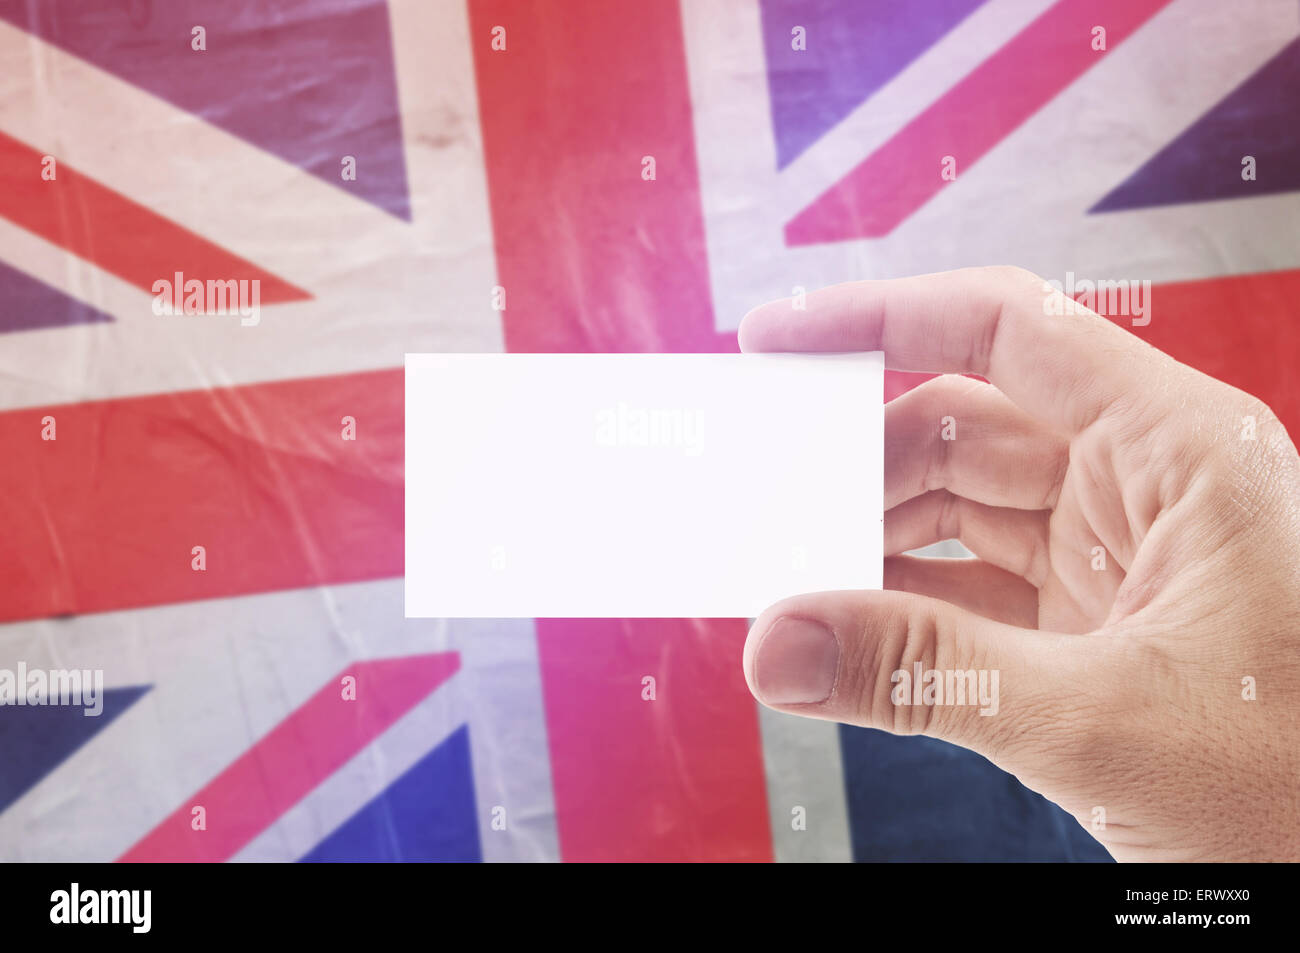 Caucasian Man Holding Blank Business Card Against United Kingdom of Great Britain Flag, Retro Vintage Rustic Tone Effect Stock Photo